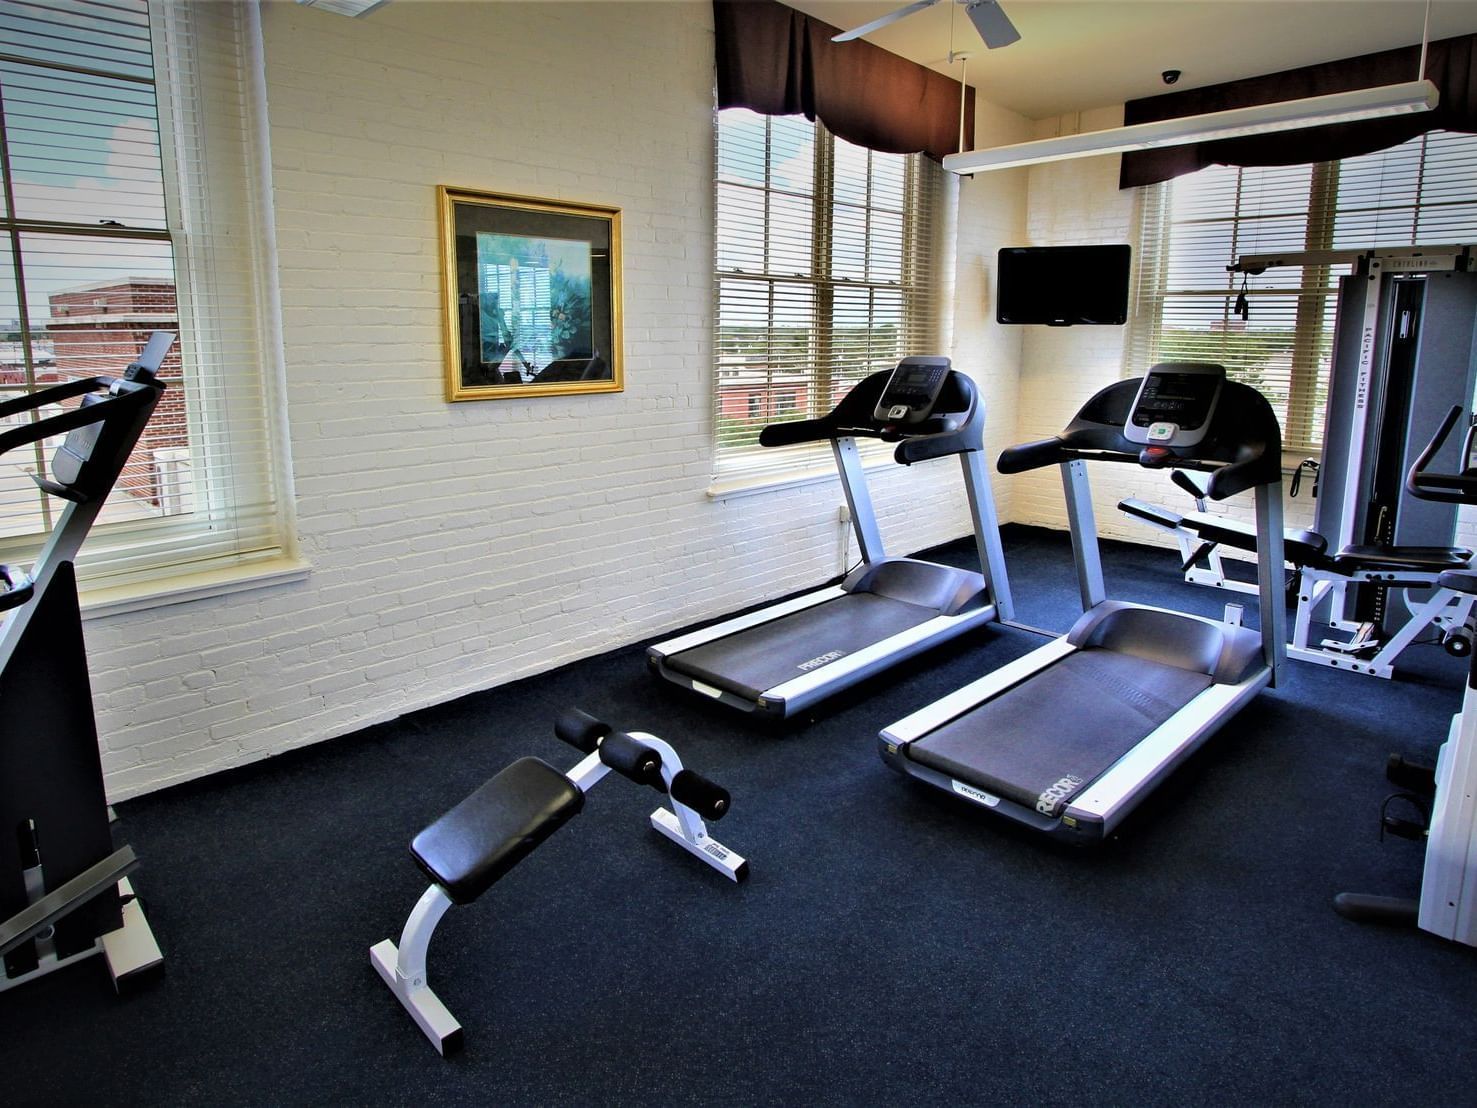 The fully equipped fitness center at Hotel at Old Town Wichita